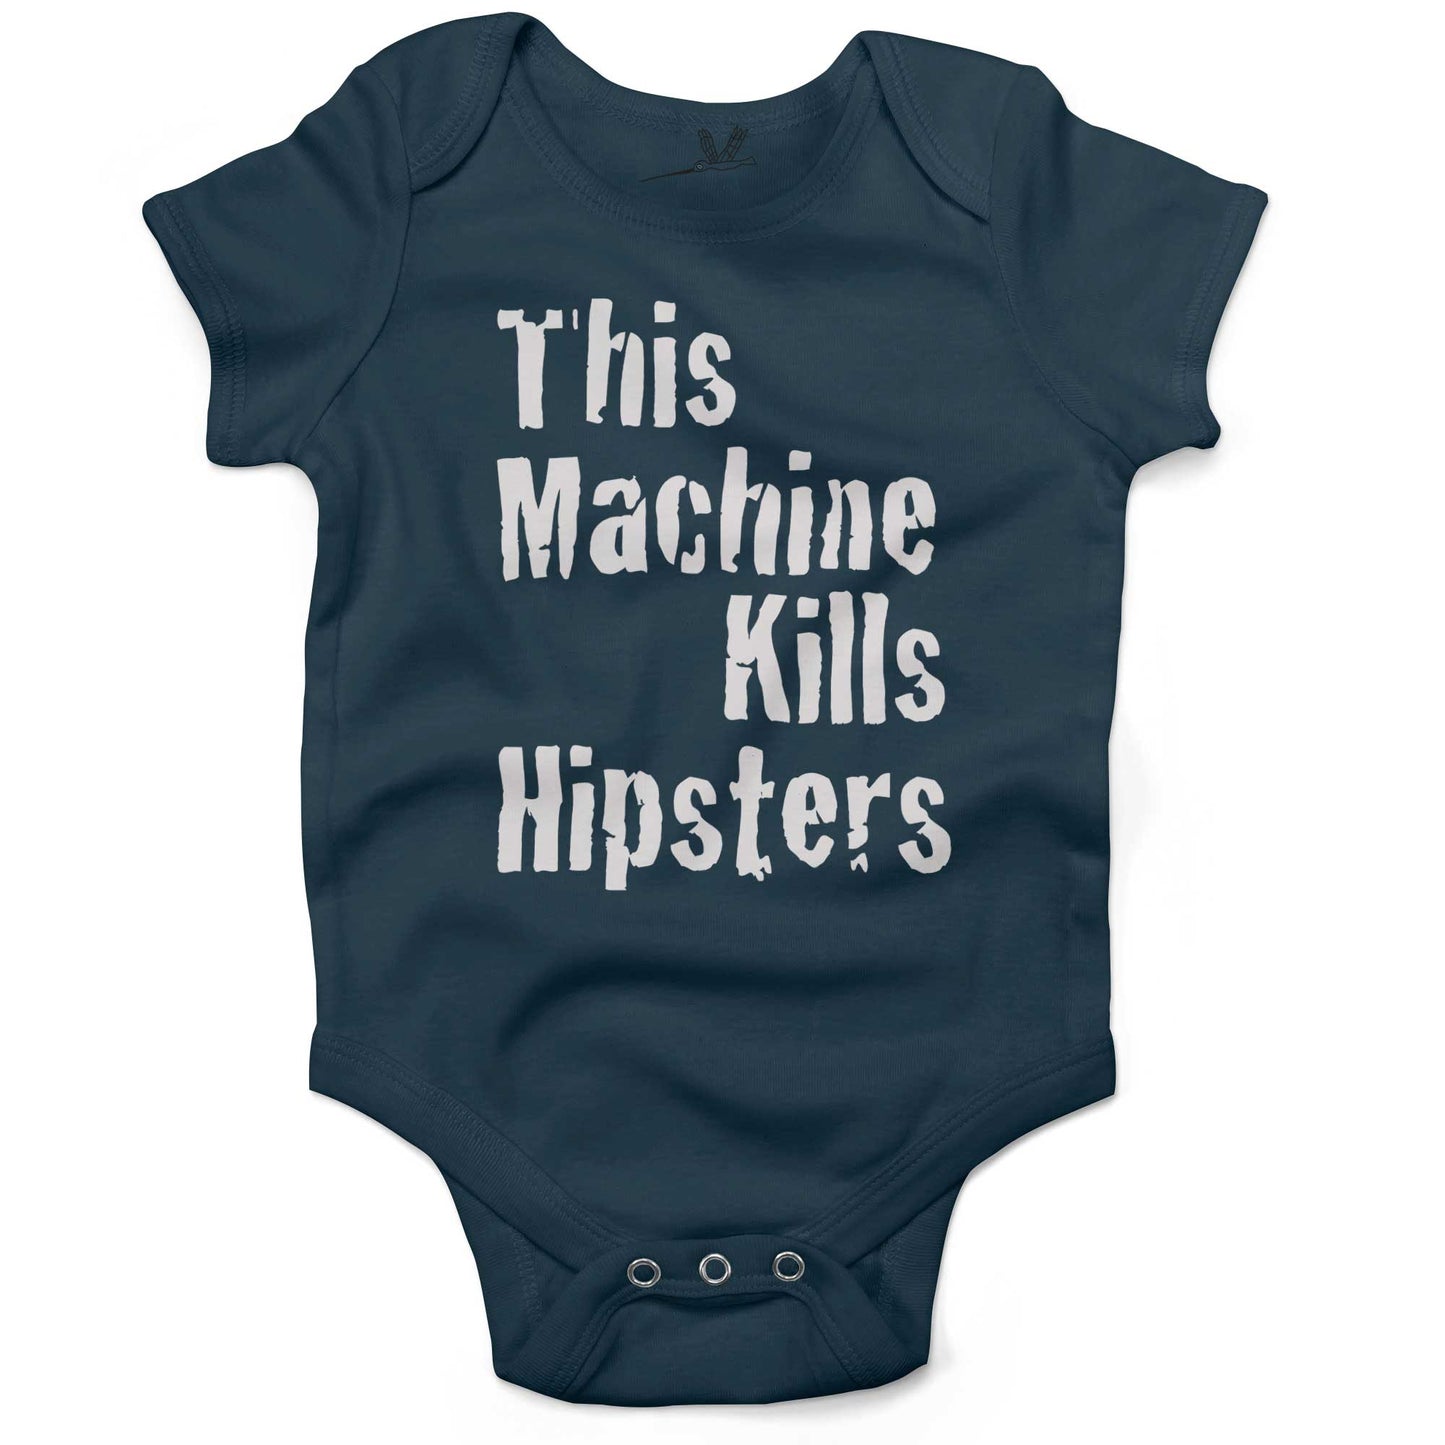 This Machine Kills Hipsters Infant Bodysuit or Raglan Tee-Organic Pacific Blue-3-6 months